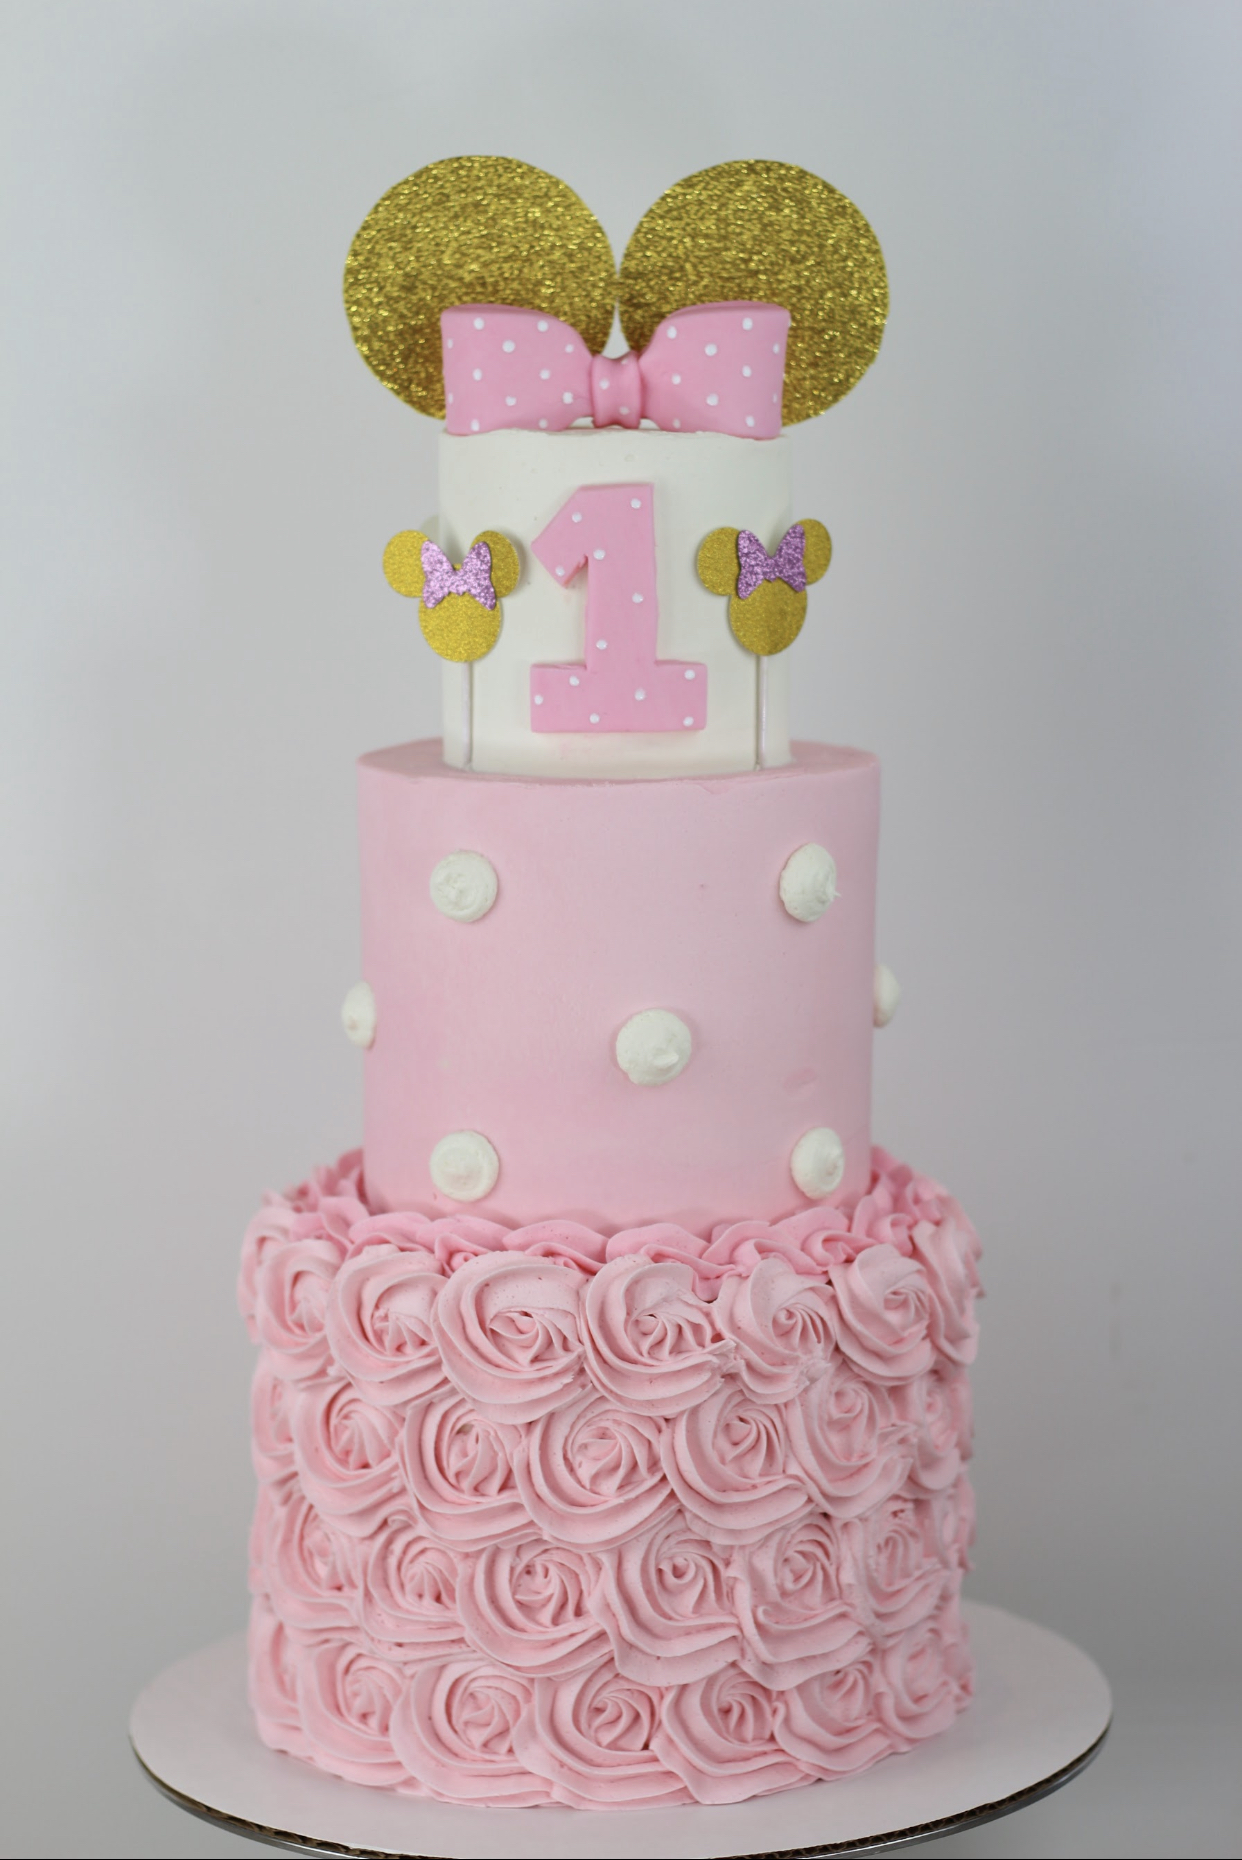 Learn how I made this Minnie Mouse Cake. I'm sharing the exact schedule I use to decorate a birthday cake for my kids. Learn how to decorate a birthday cake of your kids dreams.